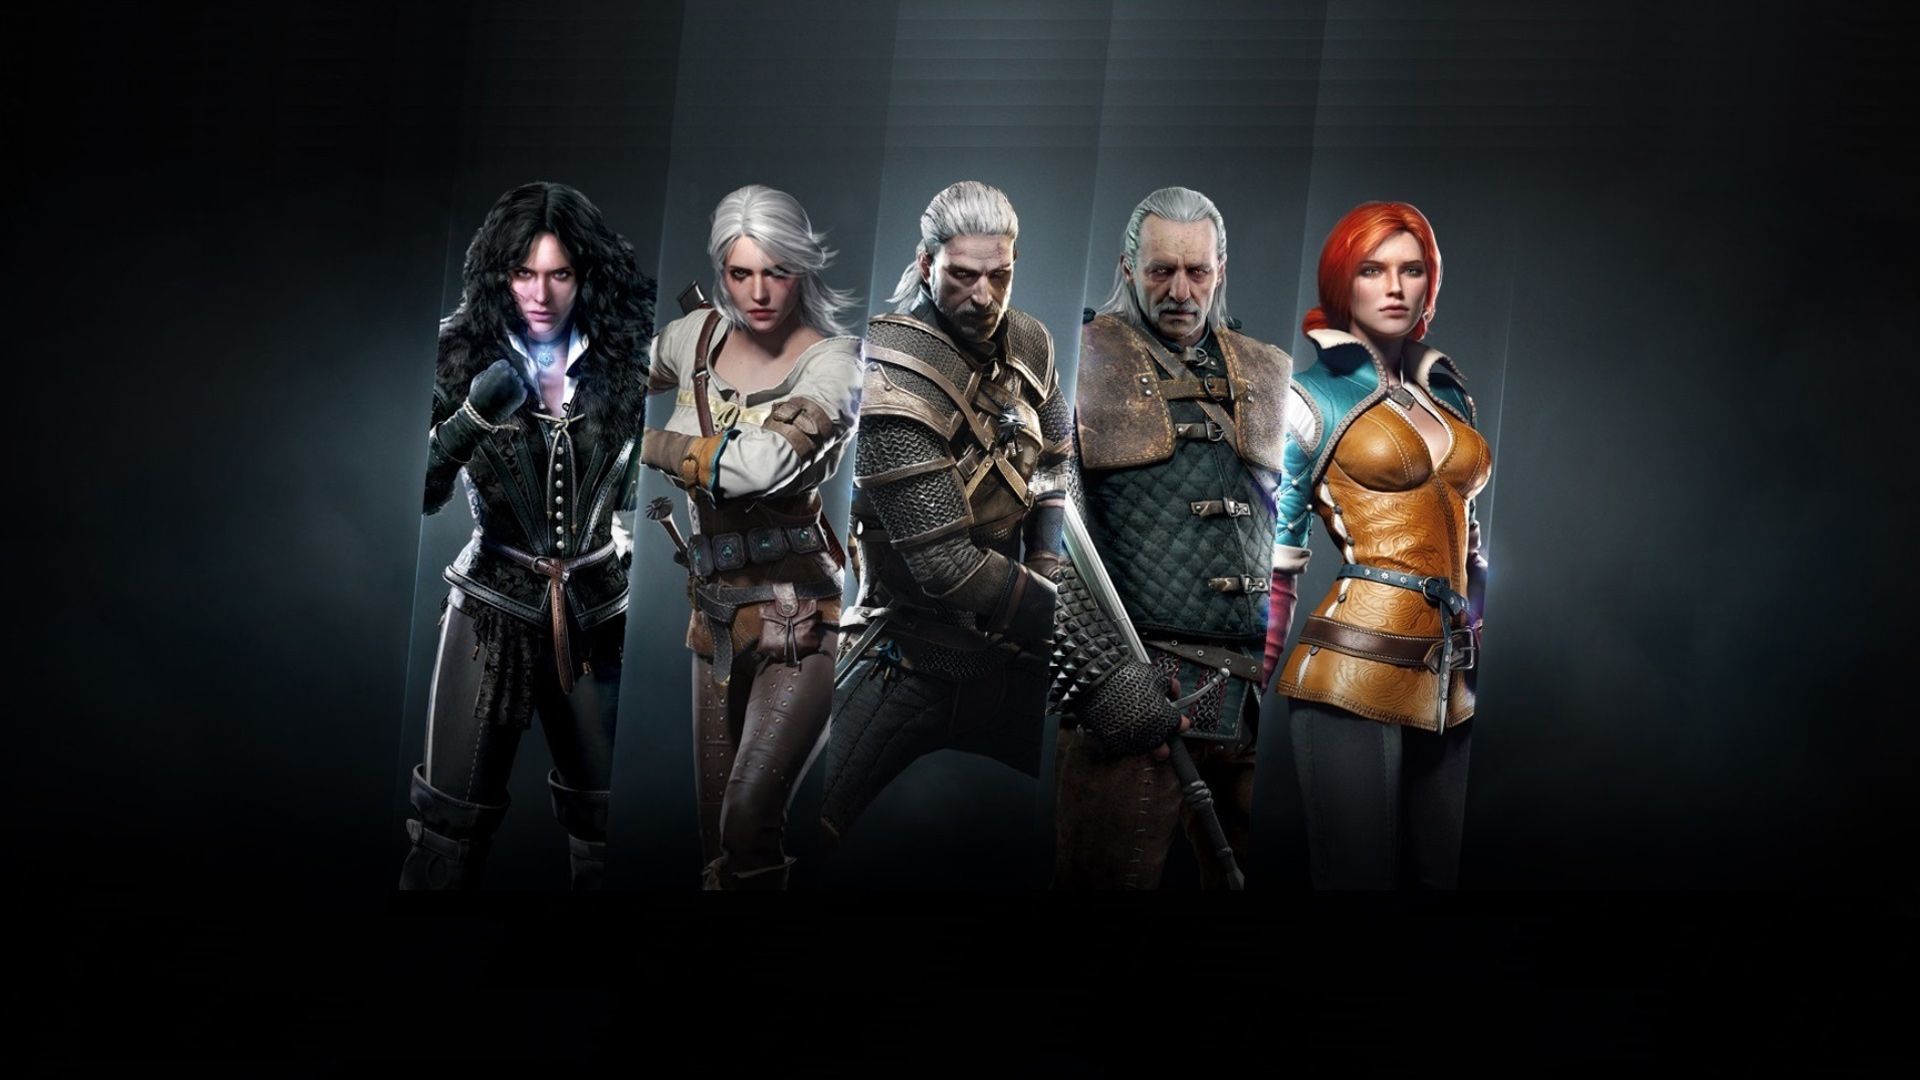 the_witcher_3_wild_hunt-game-characters-wallpaper-hd-1920x1080.jpg